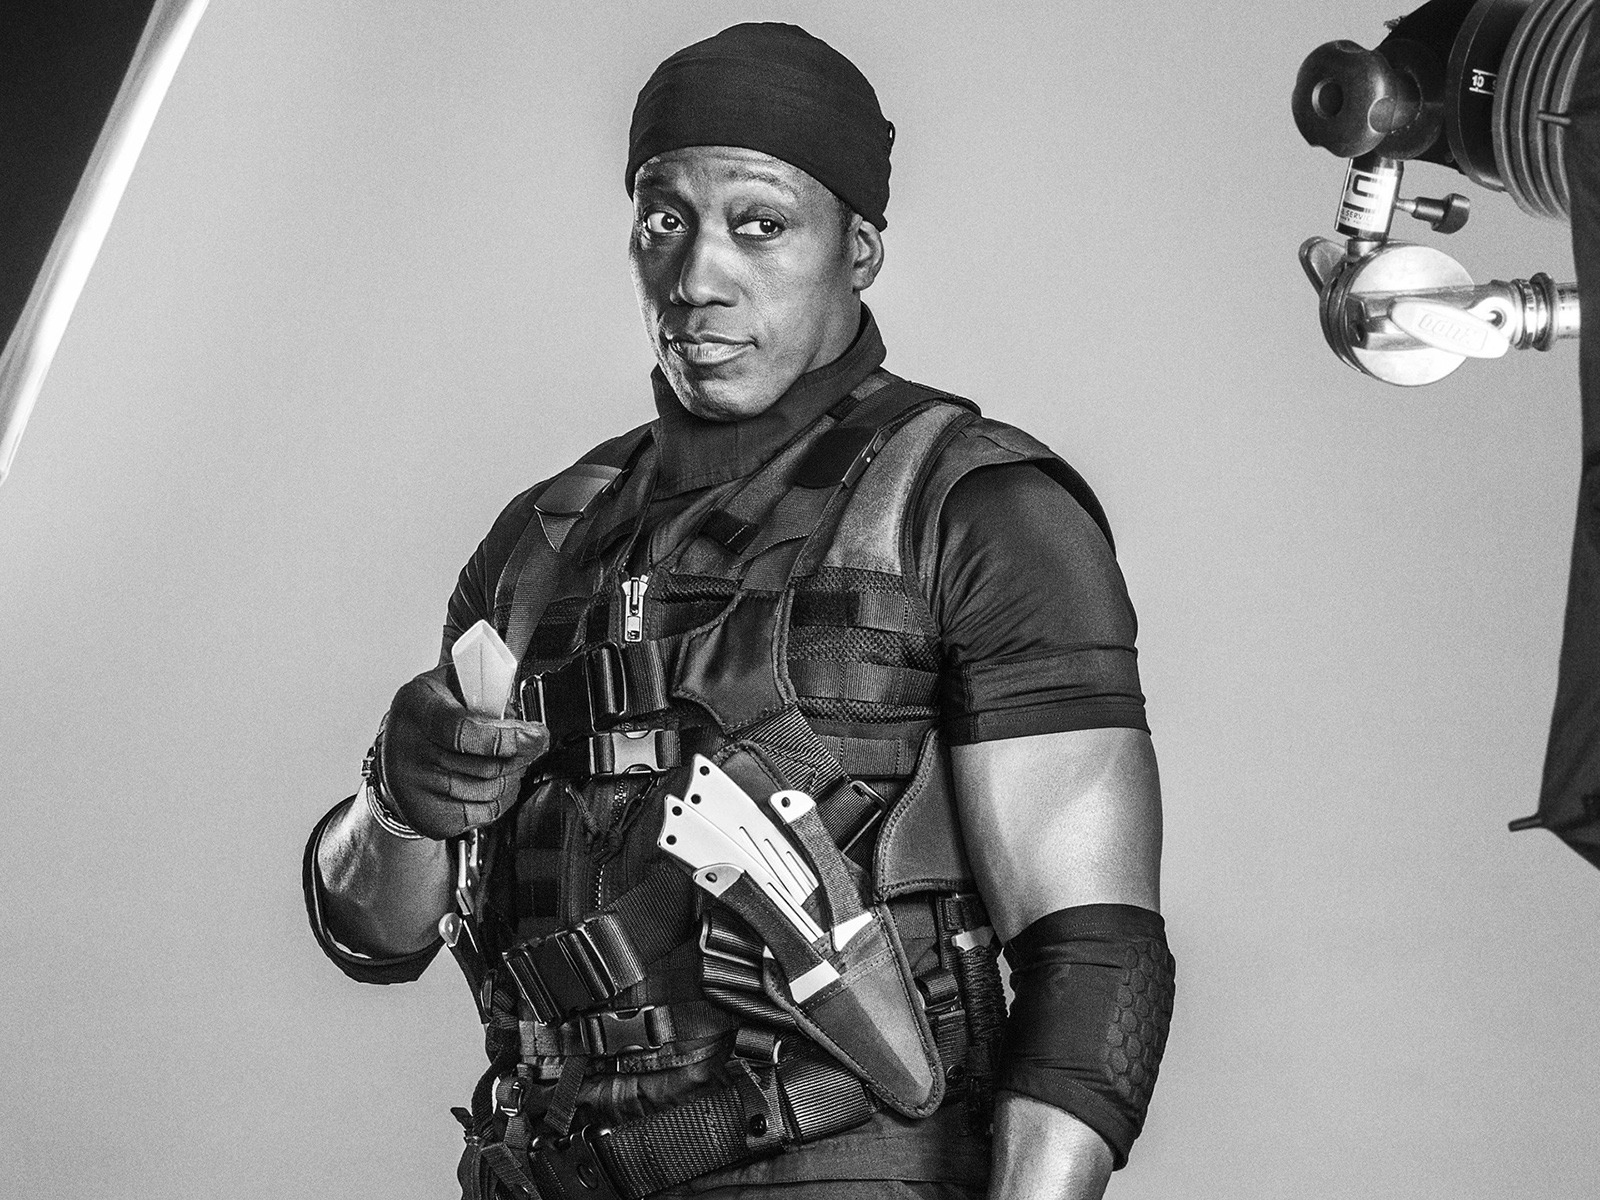 Wesley Snipes The Expendables 3 for 1600 x 1200 resolution